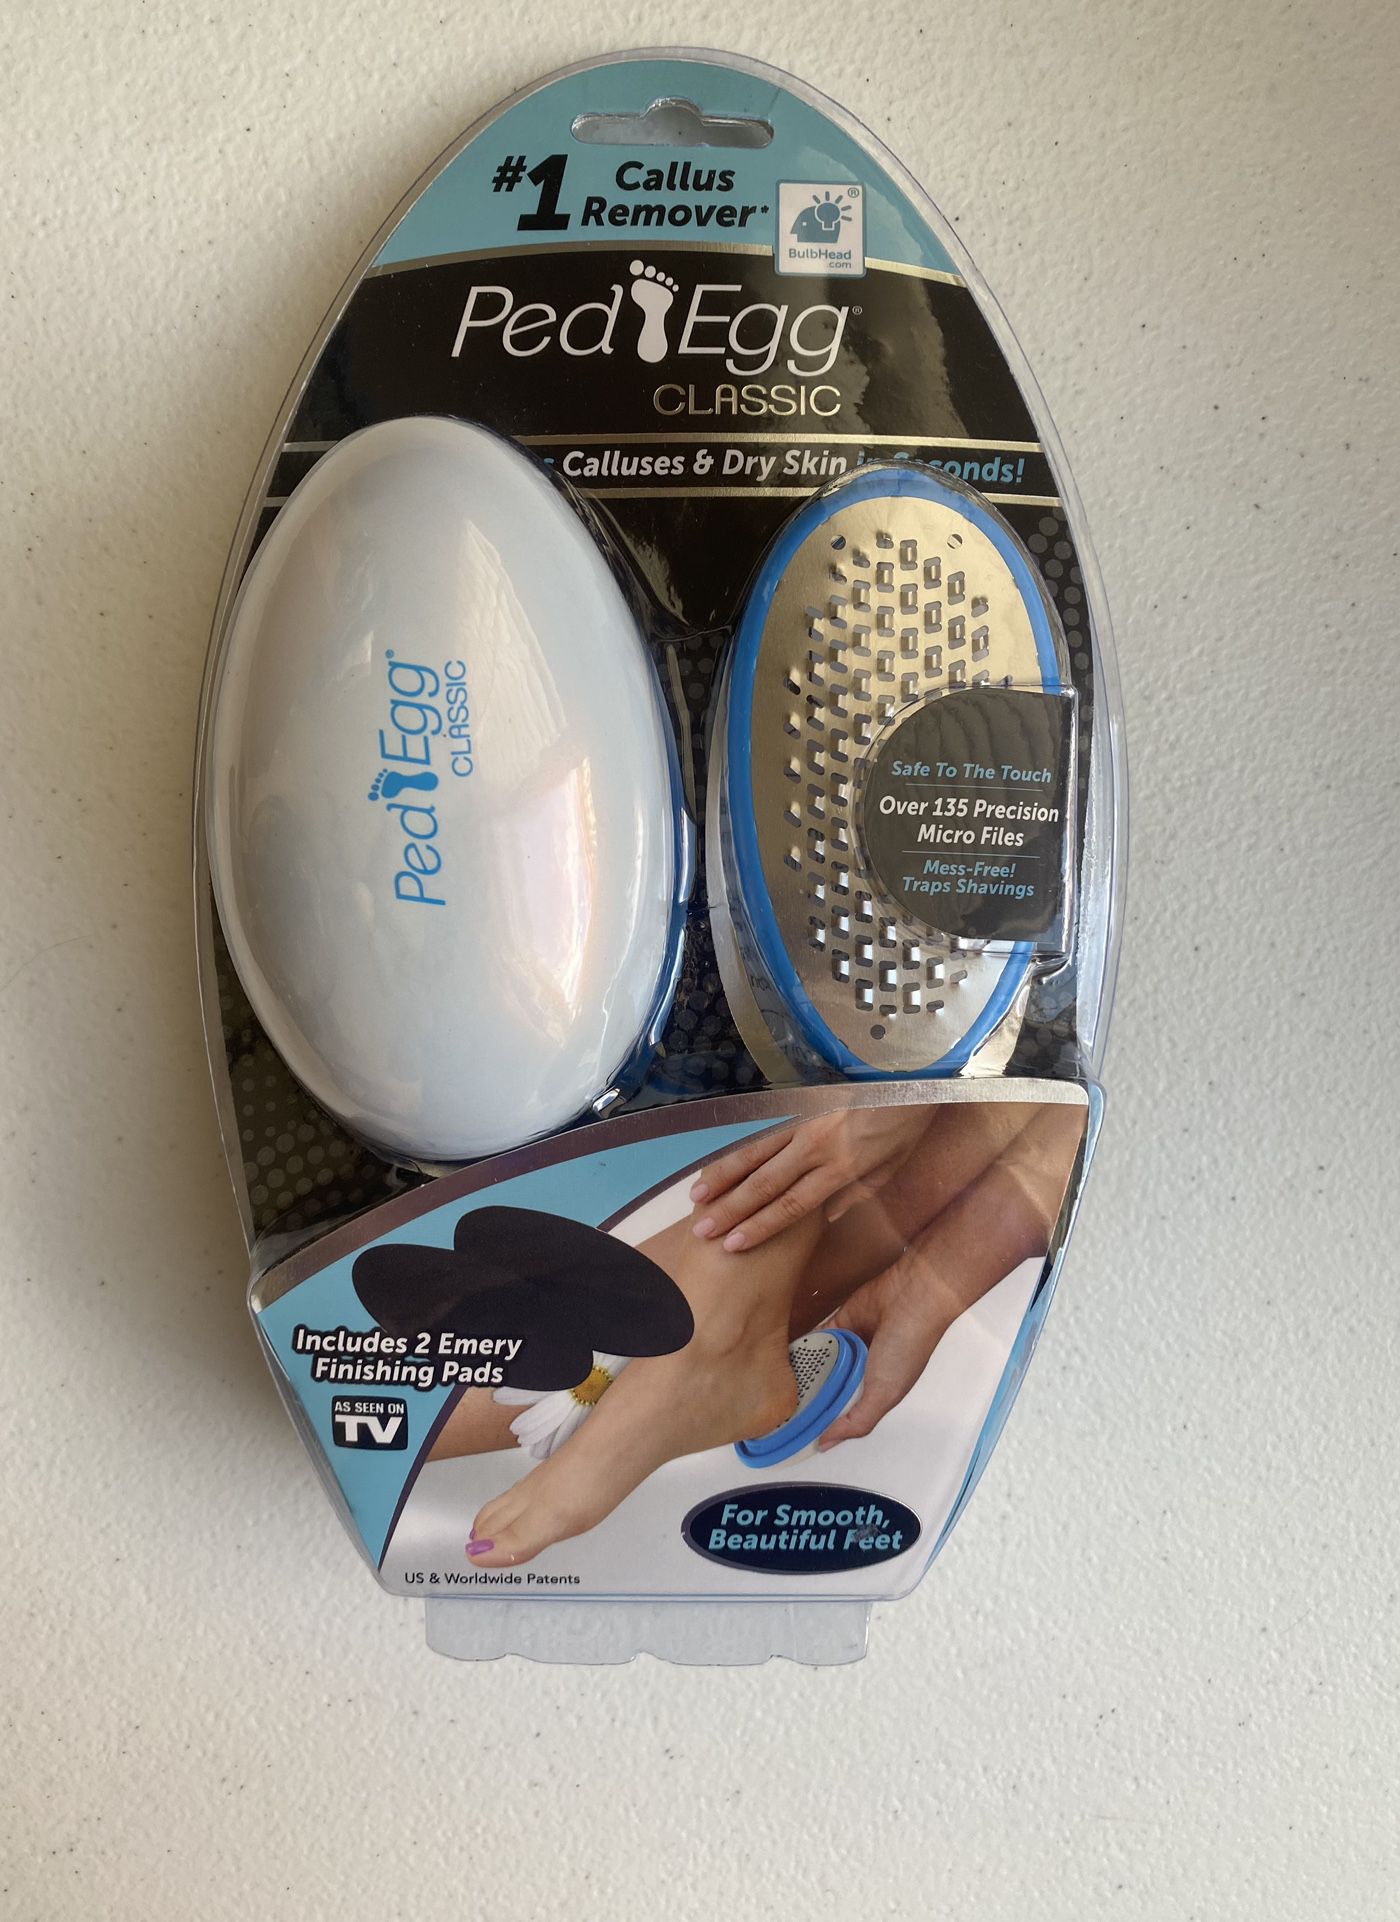  Ped Egg Classic Callus Remover, As Seen On TV, New